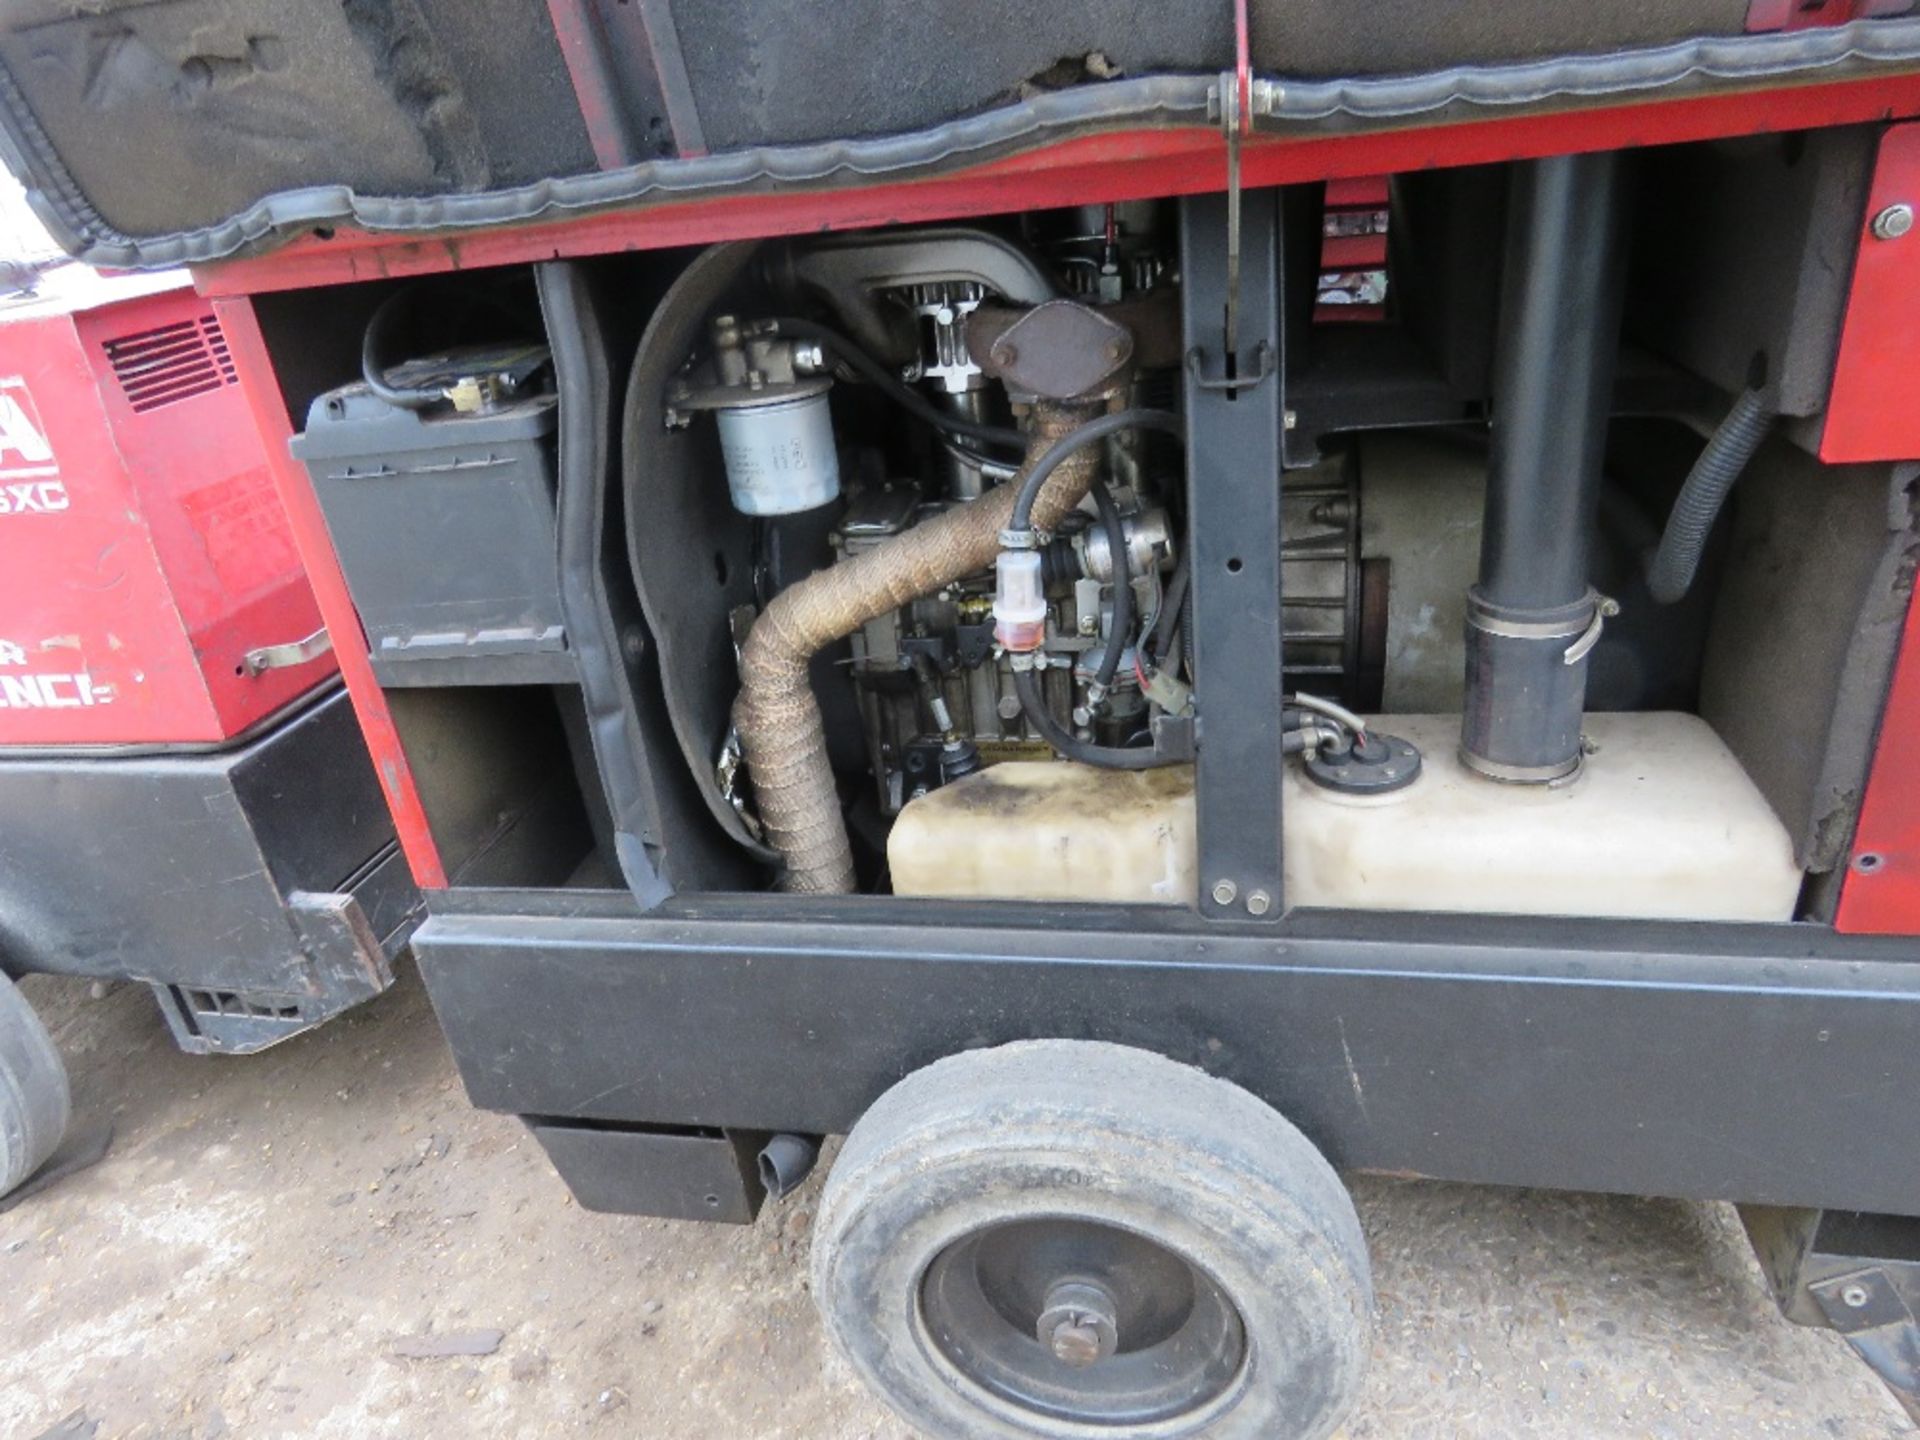 MOSA CT350LSX-CC/CV WELDER GENERATOR WITH CHOPPER TECHNOLOGY. WHEN TESTED WAS SEEN TO RUN AND SHOWED - Image 4 of 4